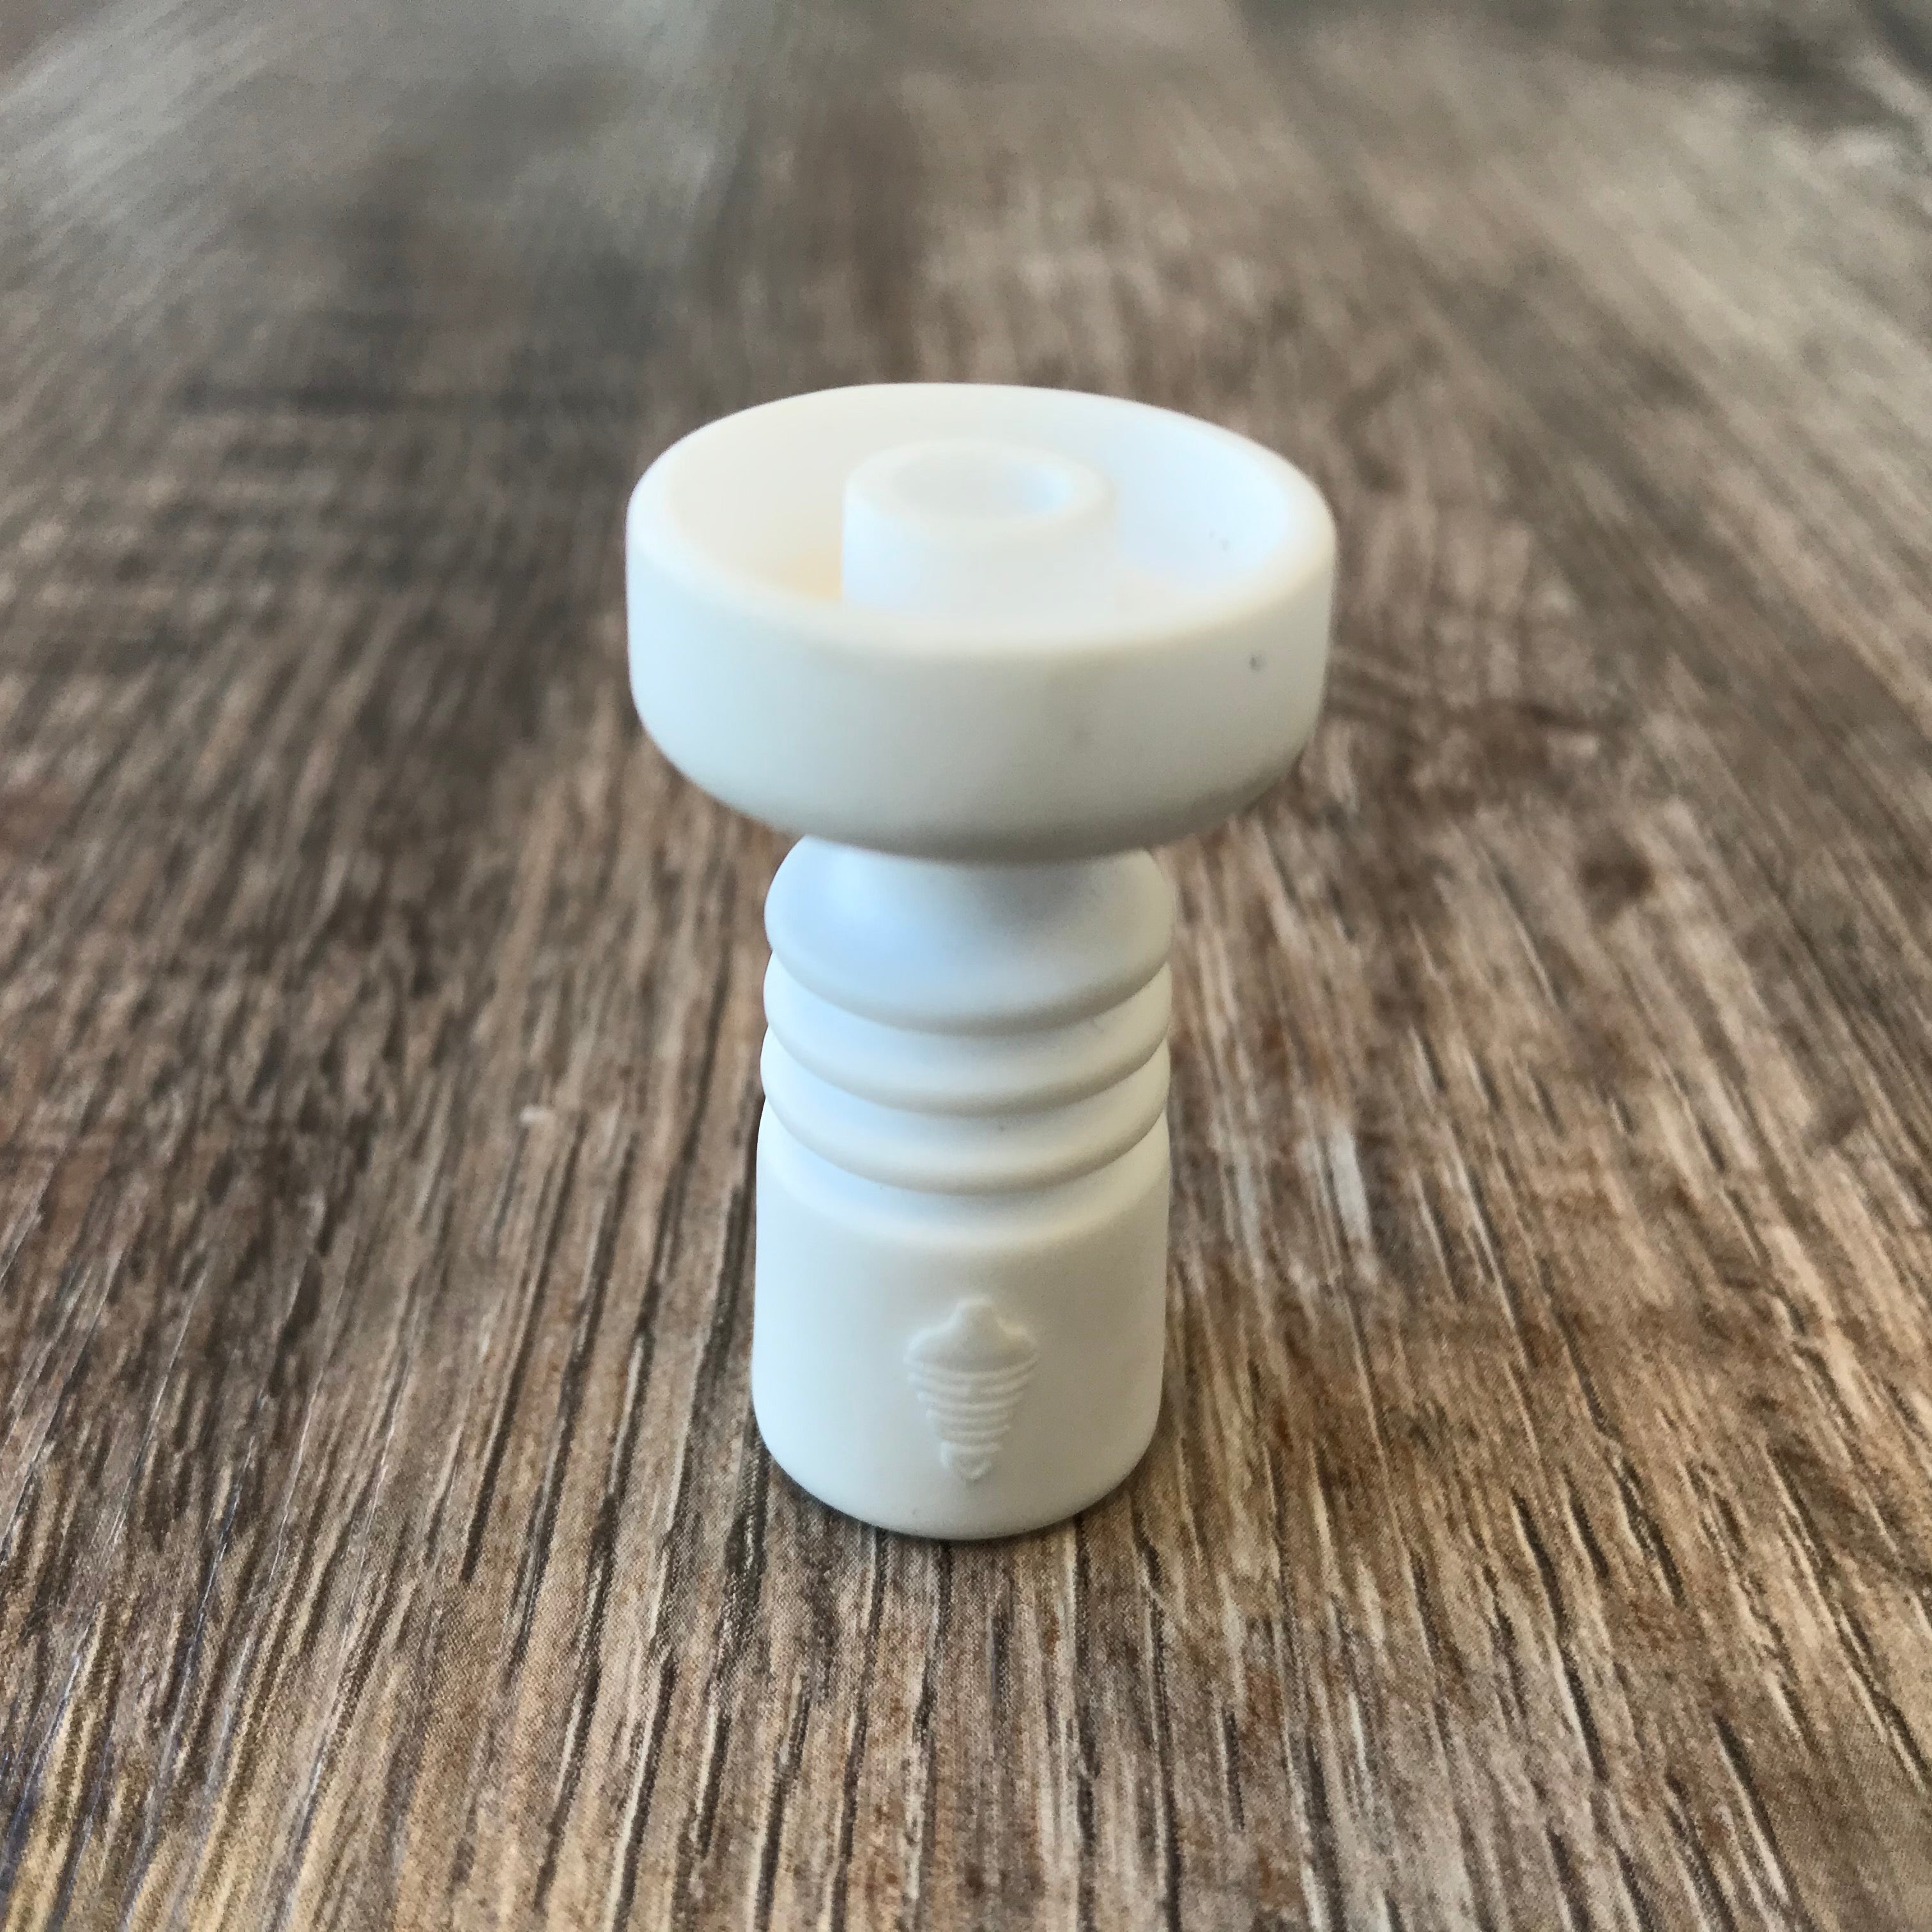 HIVE Ceramic One-Piece Domeless Nail 10mm Female